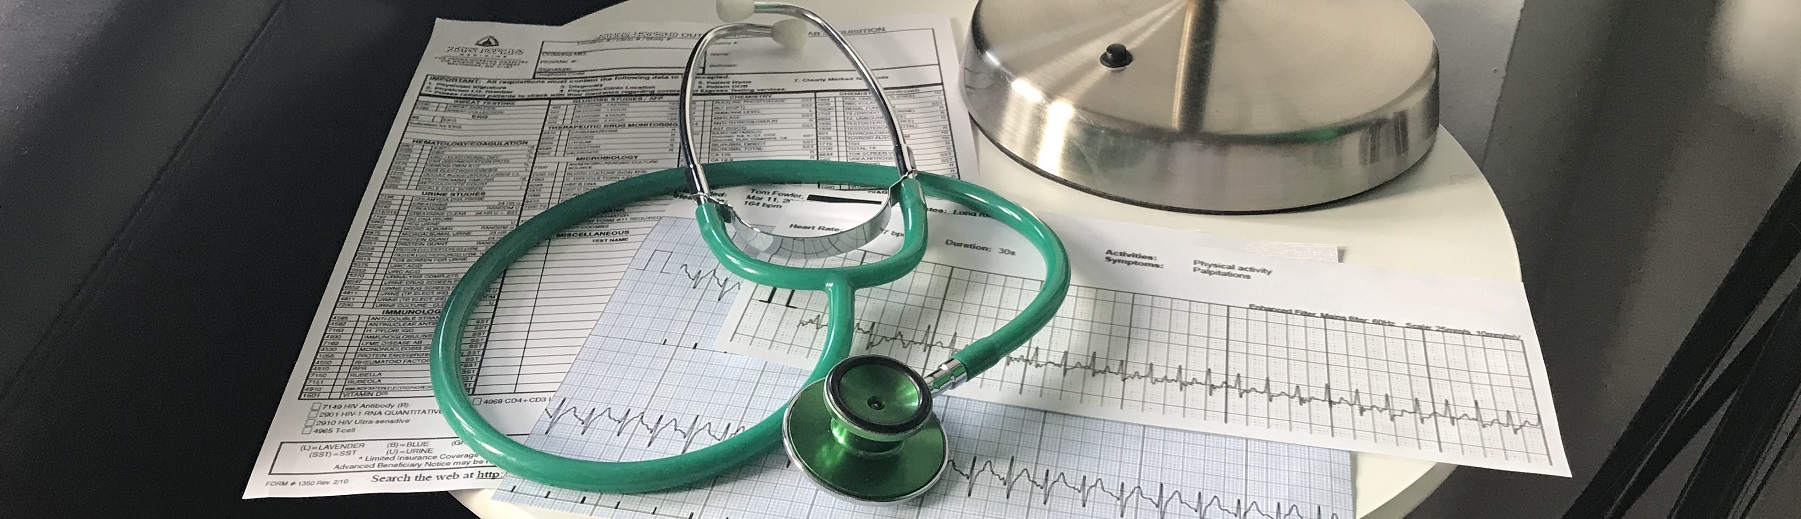 An image of a stethoscope on a desk